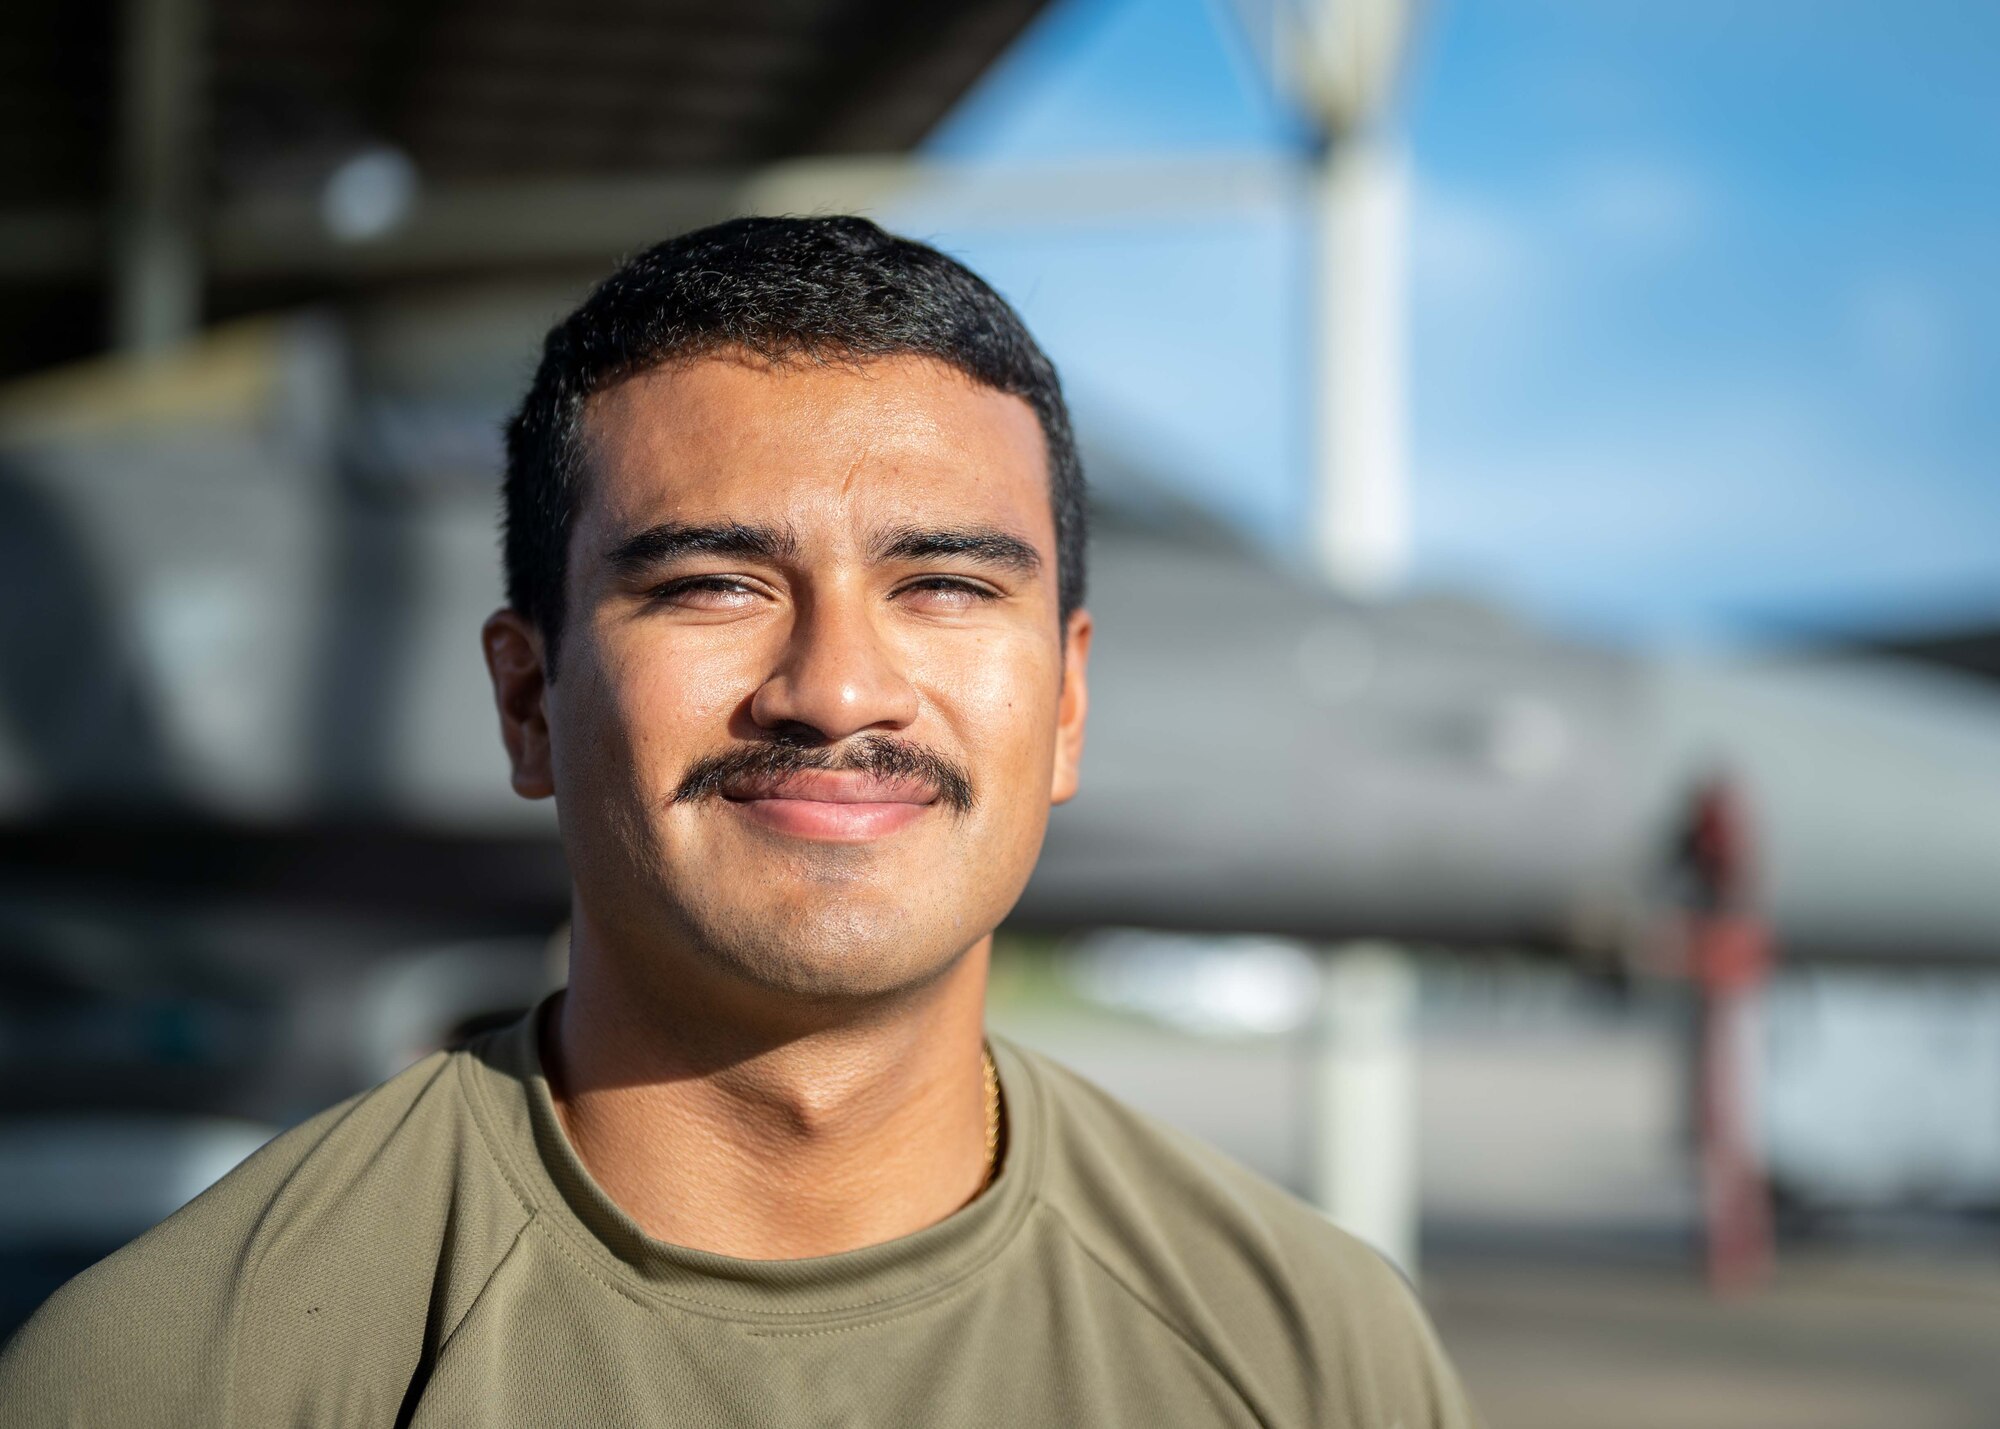 A crew chief smiles for a portrait on the flightline.